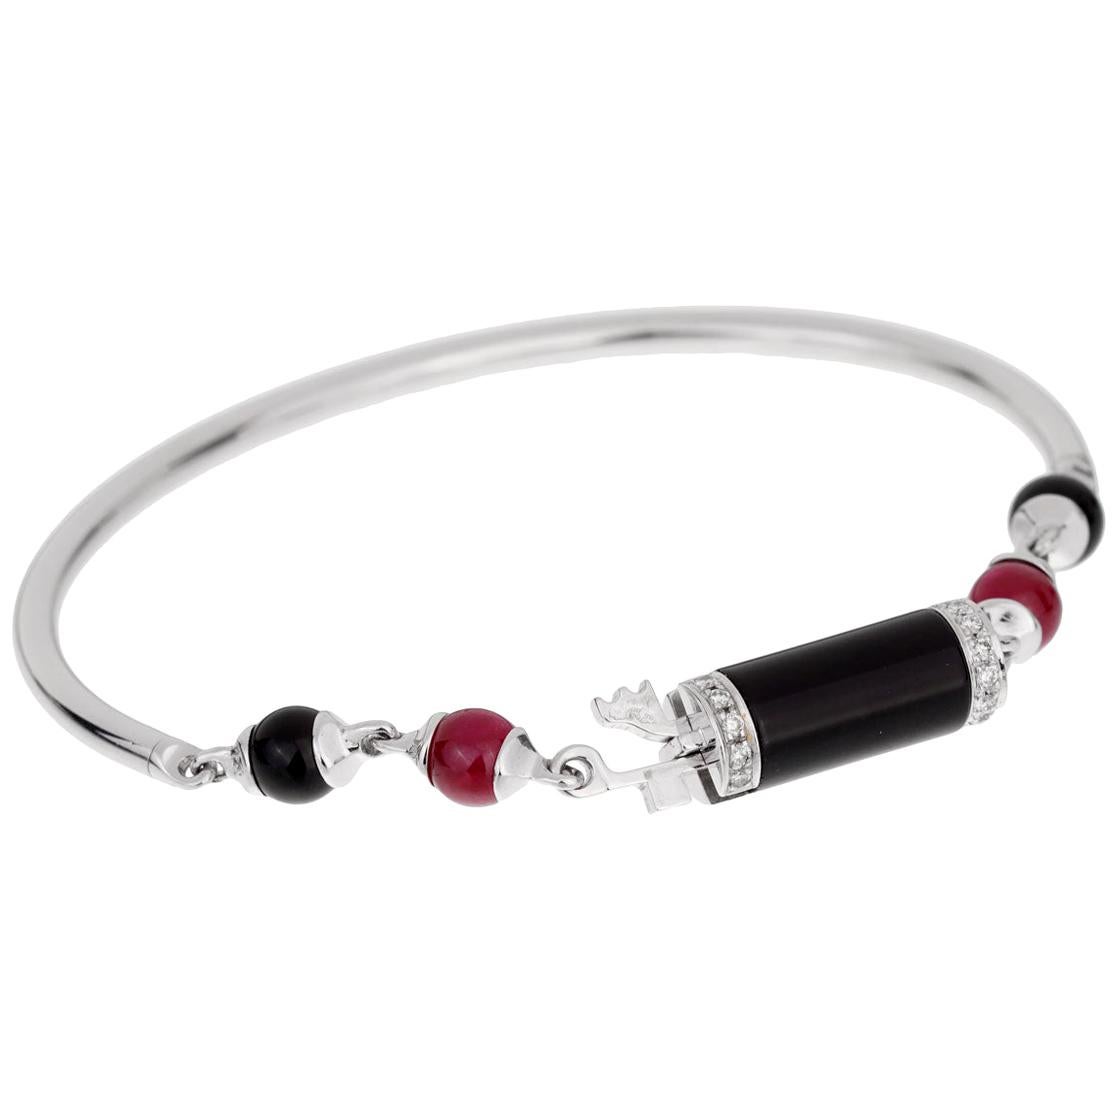 A chic Cartier bracelet from the Le Baiser du Dragon collection carefully crafted in 18k white gold, the bracelet features ruby, and onyx stations adorned with round brilliant cut diamonds on the central locking mechanism.

Size 16cm - 6.30